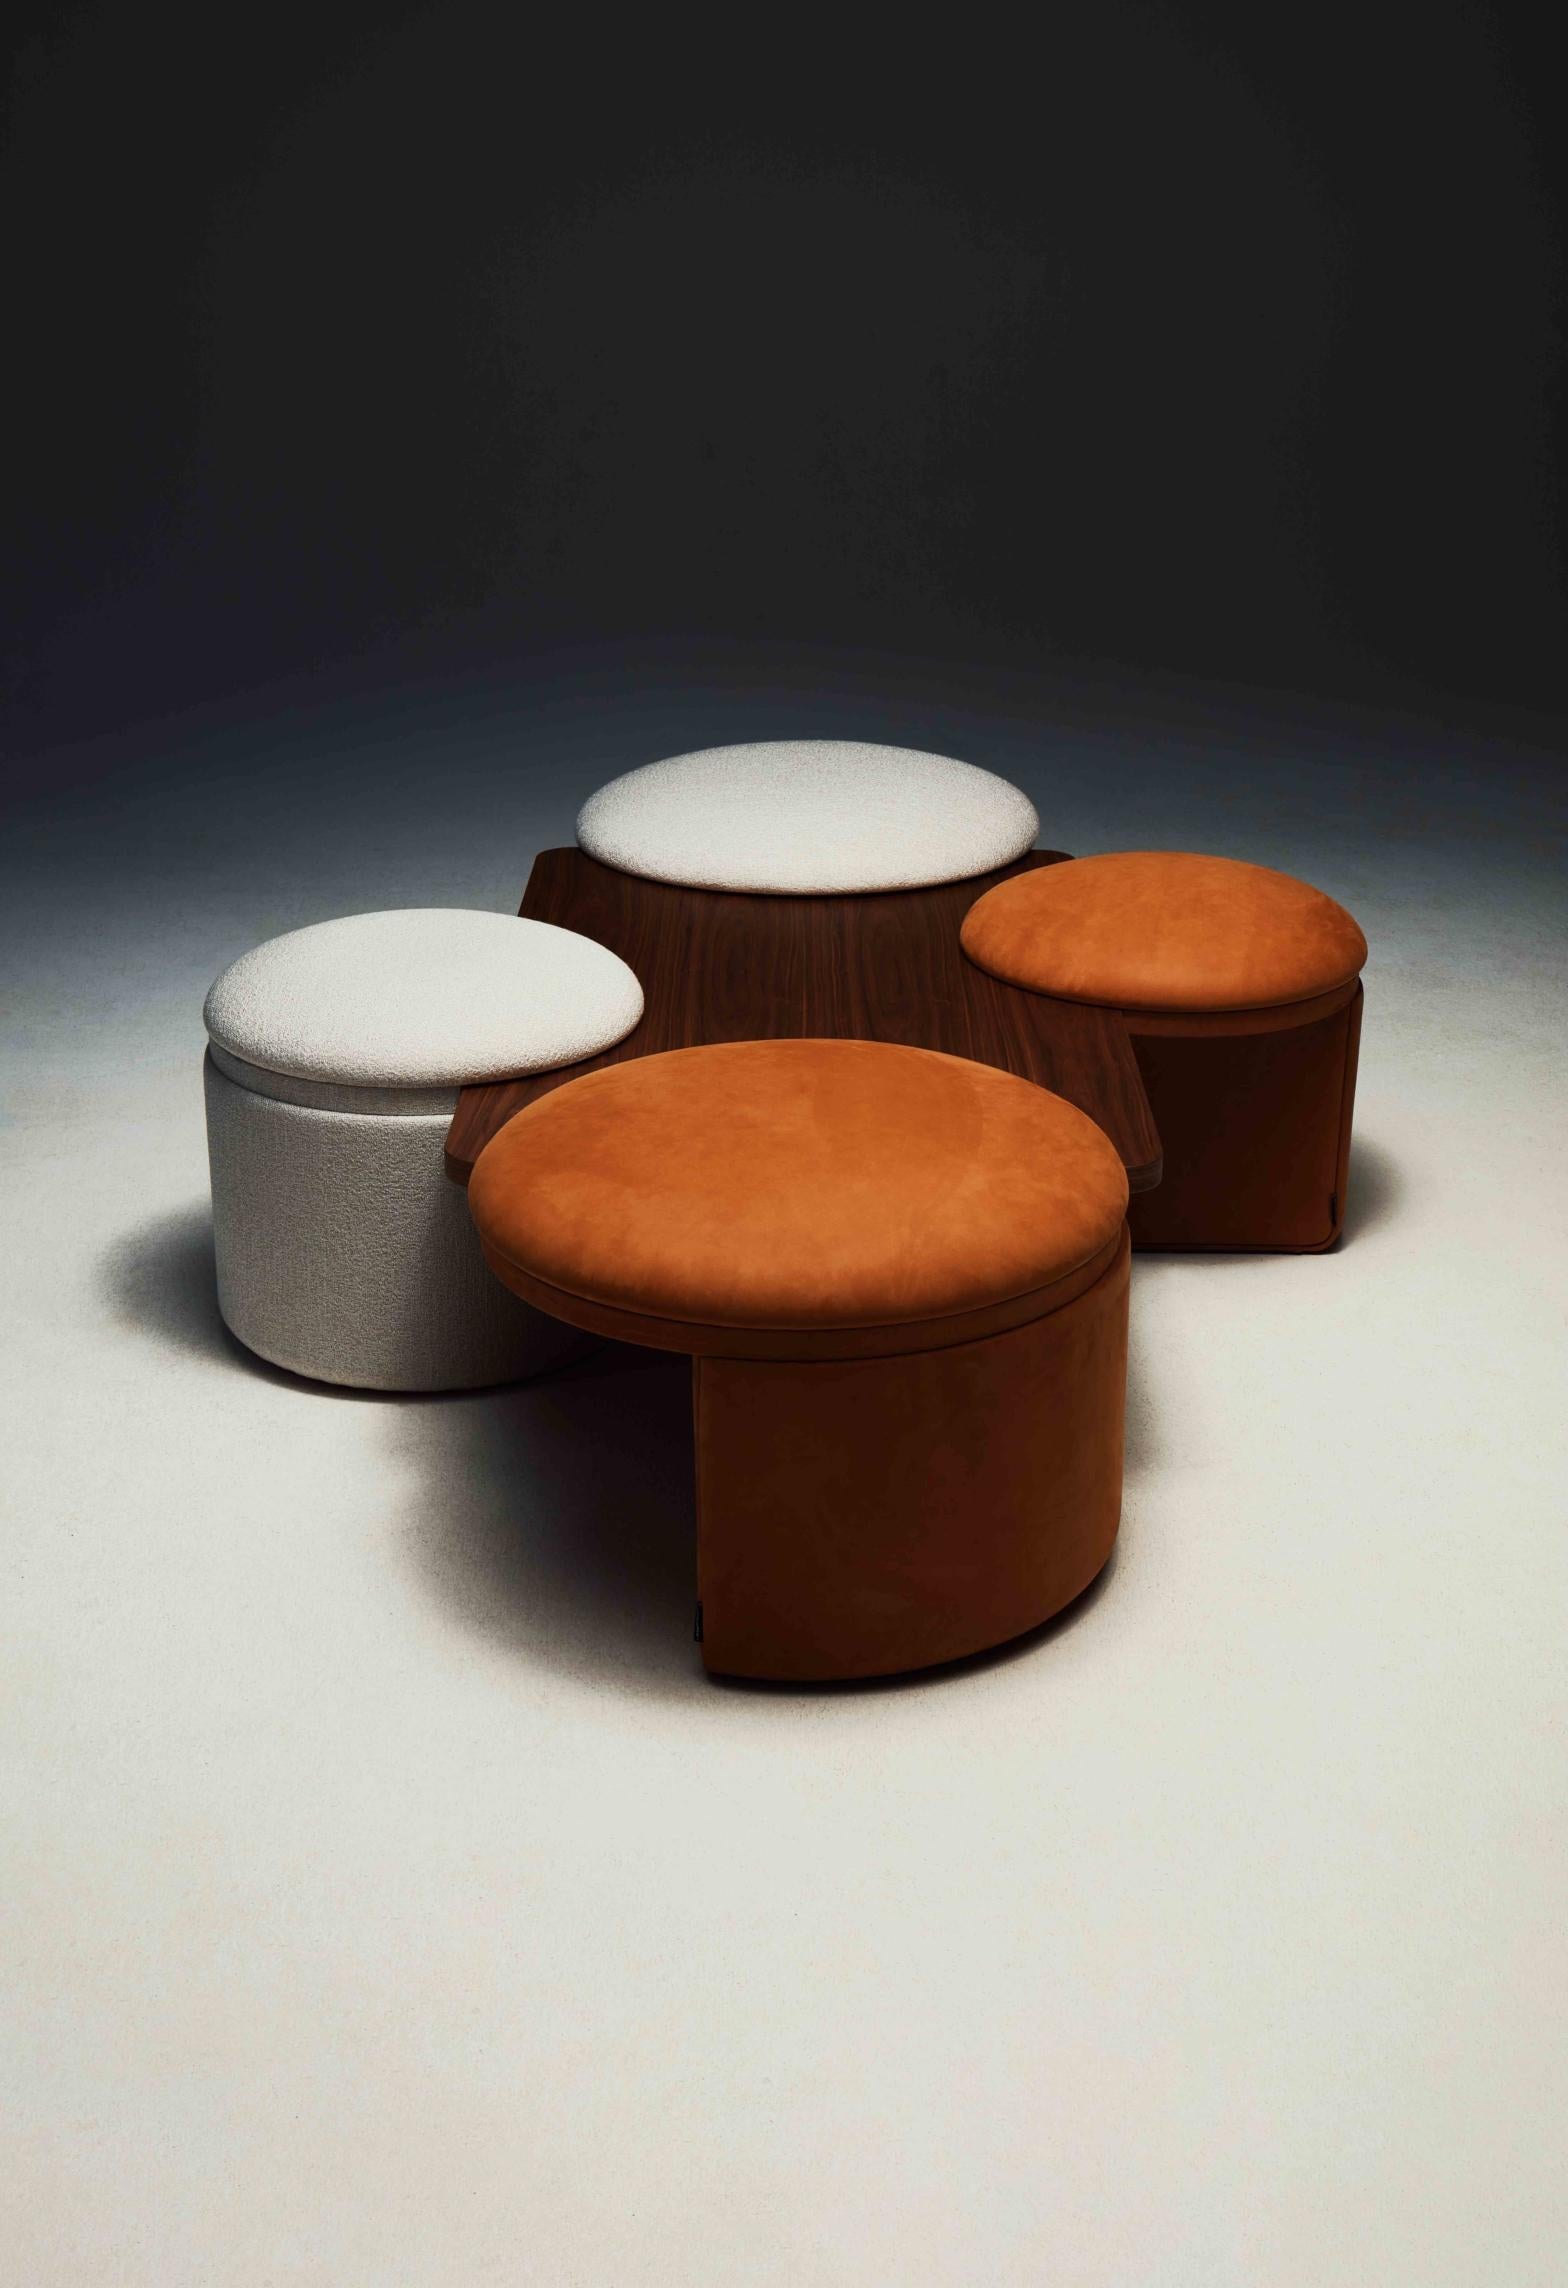 Amazone composed by 4 Pouf by Atelier oï
Dimensions: W 199 x D 13.9 x H 47 cm
Materials: Wood and foam
Upholstery: fabrics or leathers


Atelier oï was established in 1991, in La Neuveville, Switzerland, by architects and designers Aurel Aebi,